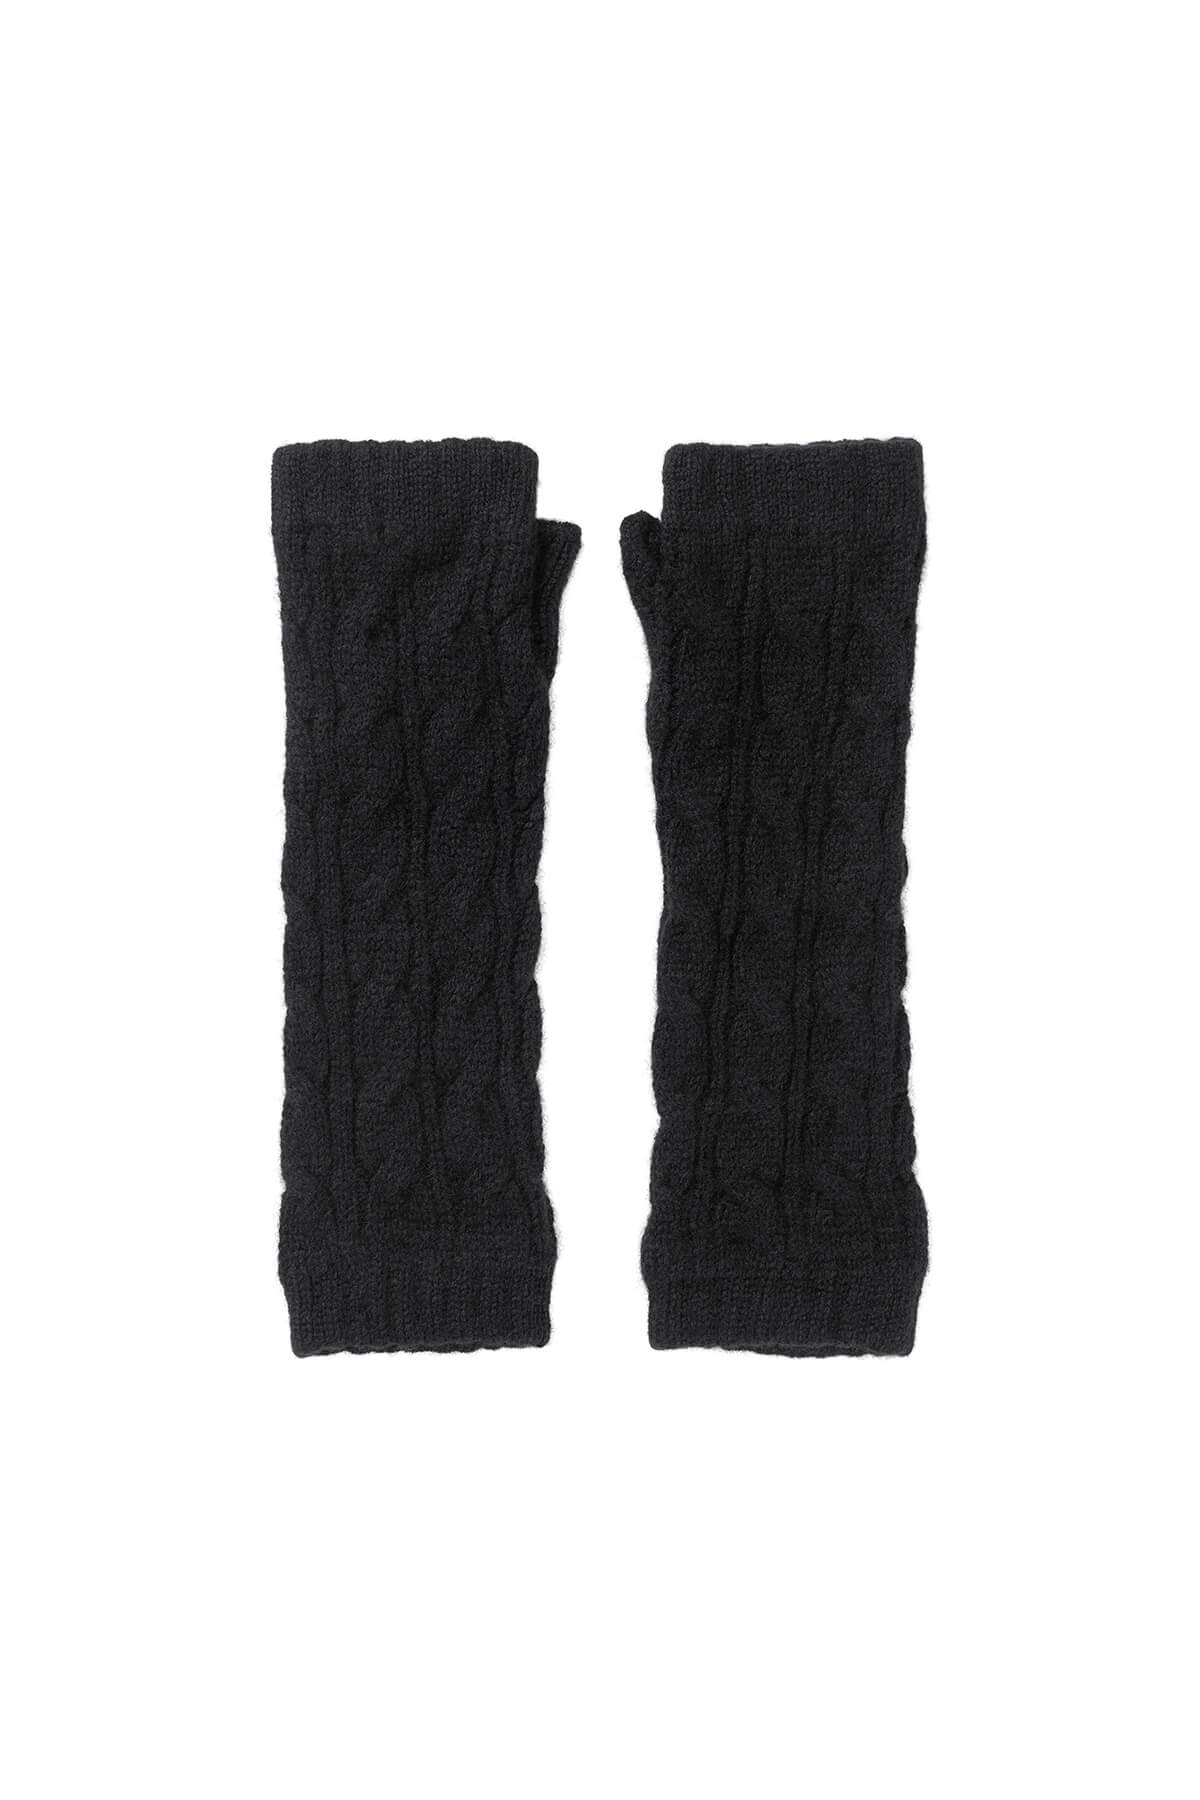 Johnstons of Elgin’s Black Cashmere Gauzy Cable Wrist Warmers on a white background HAY03305SA0900